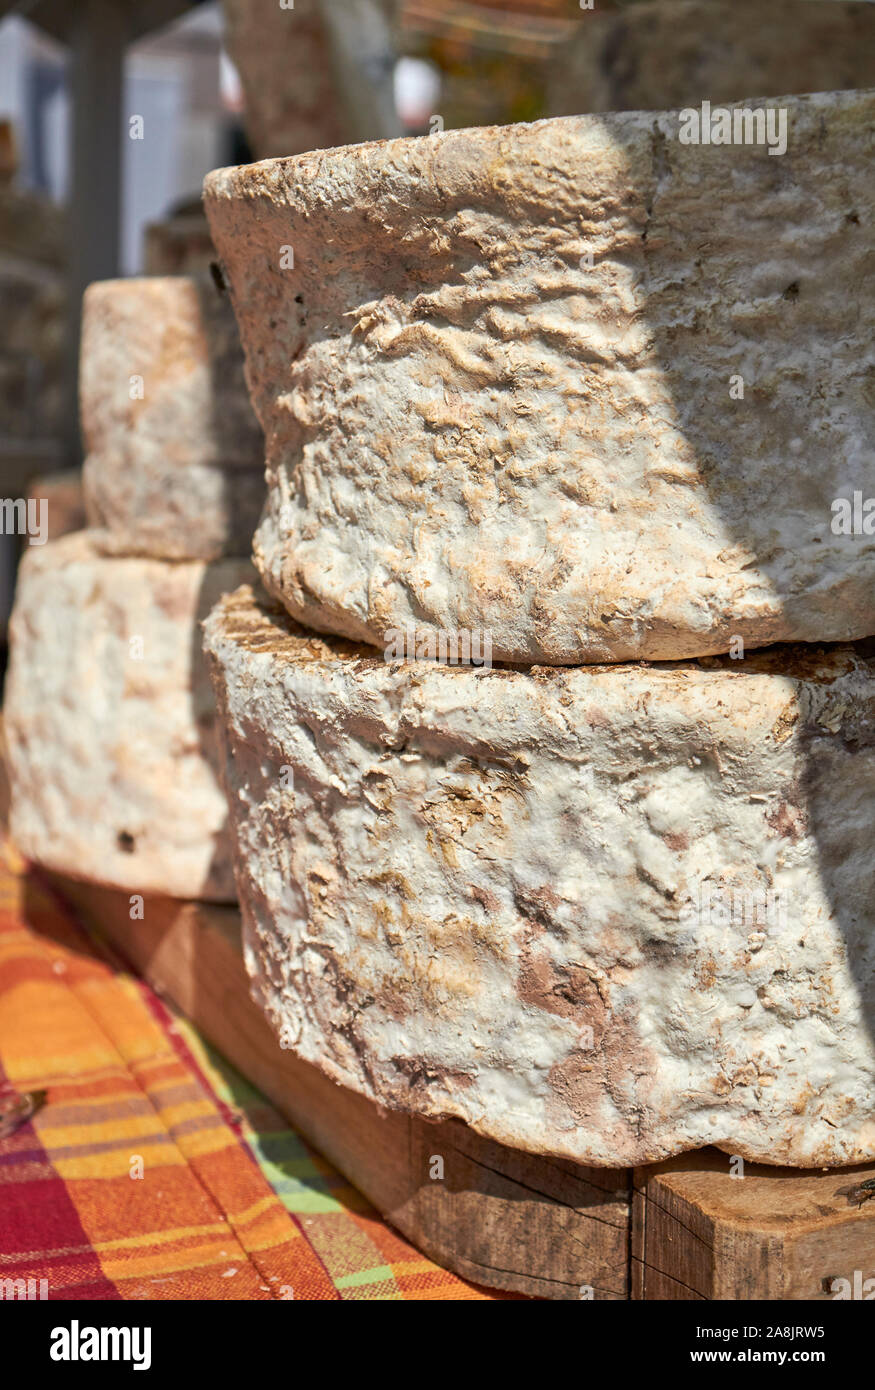 Wheels of cheese on display at the 2019 Slow Cheese exhibition at Bra, Cuneo, Piemonte, Italy Stock Photo